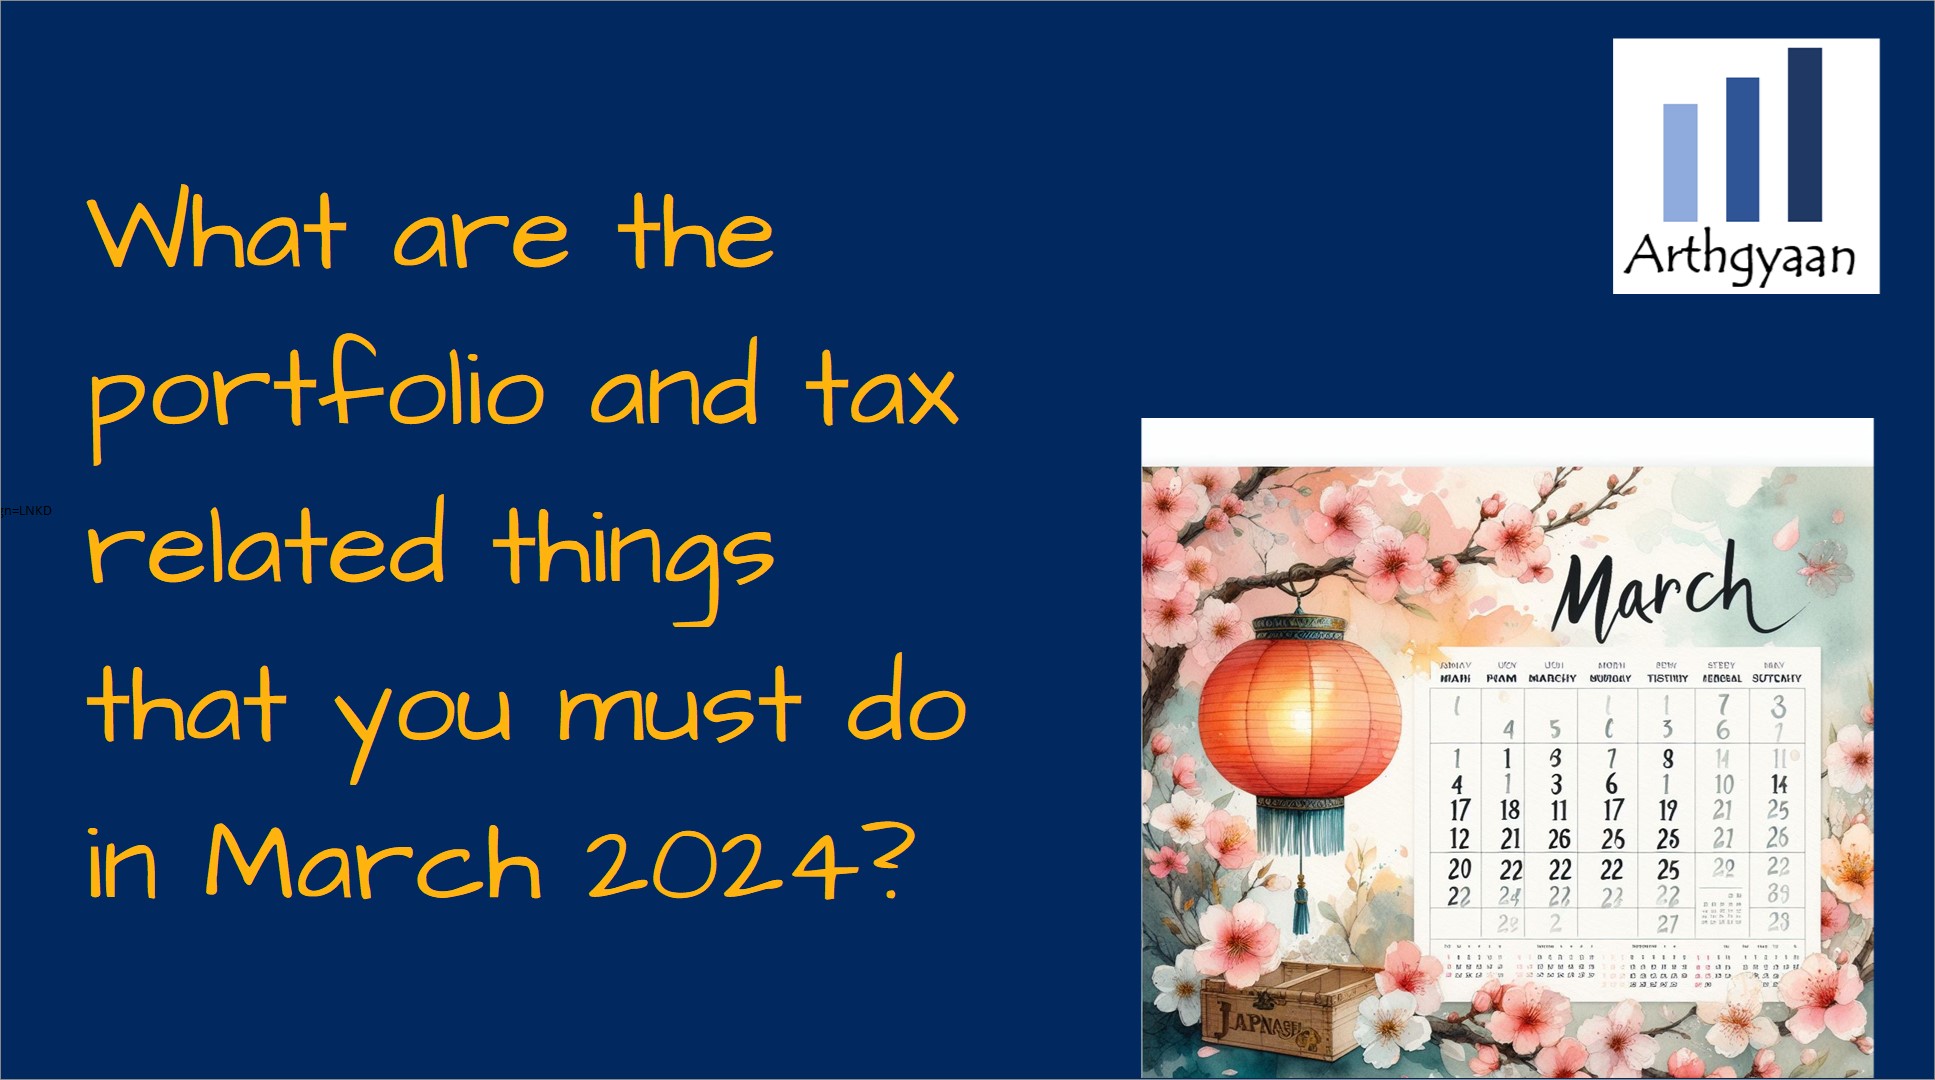 What are the portfolio and tax related things that you must do in March 2024?